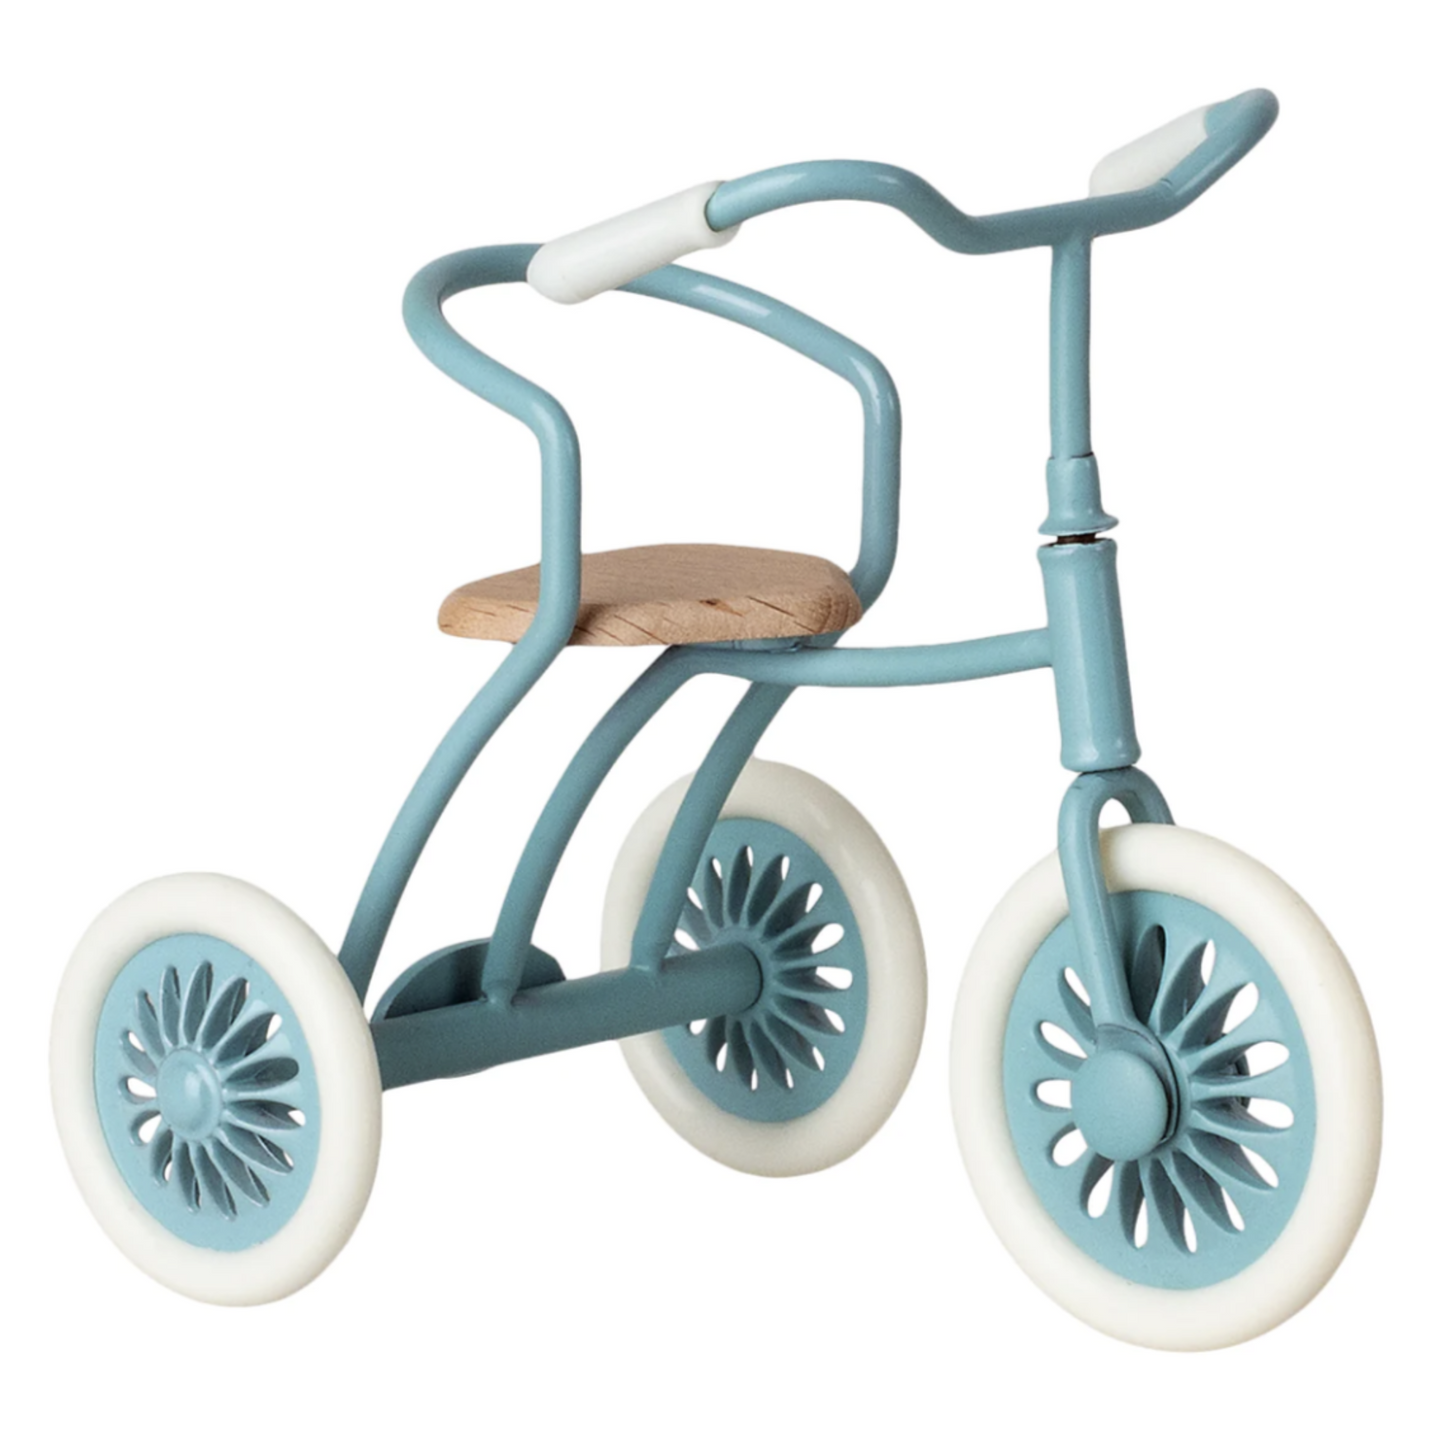 Maileg Tricycle for Mouse with Abri à Tricycle, Petrol (8155857518879)